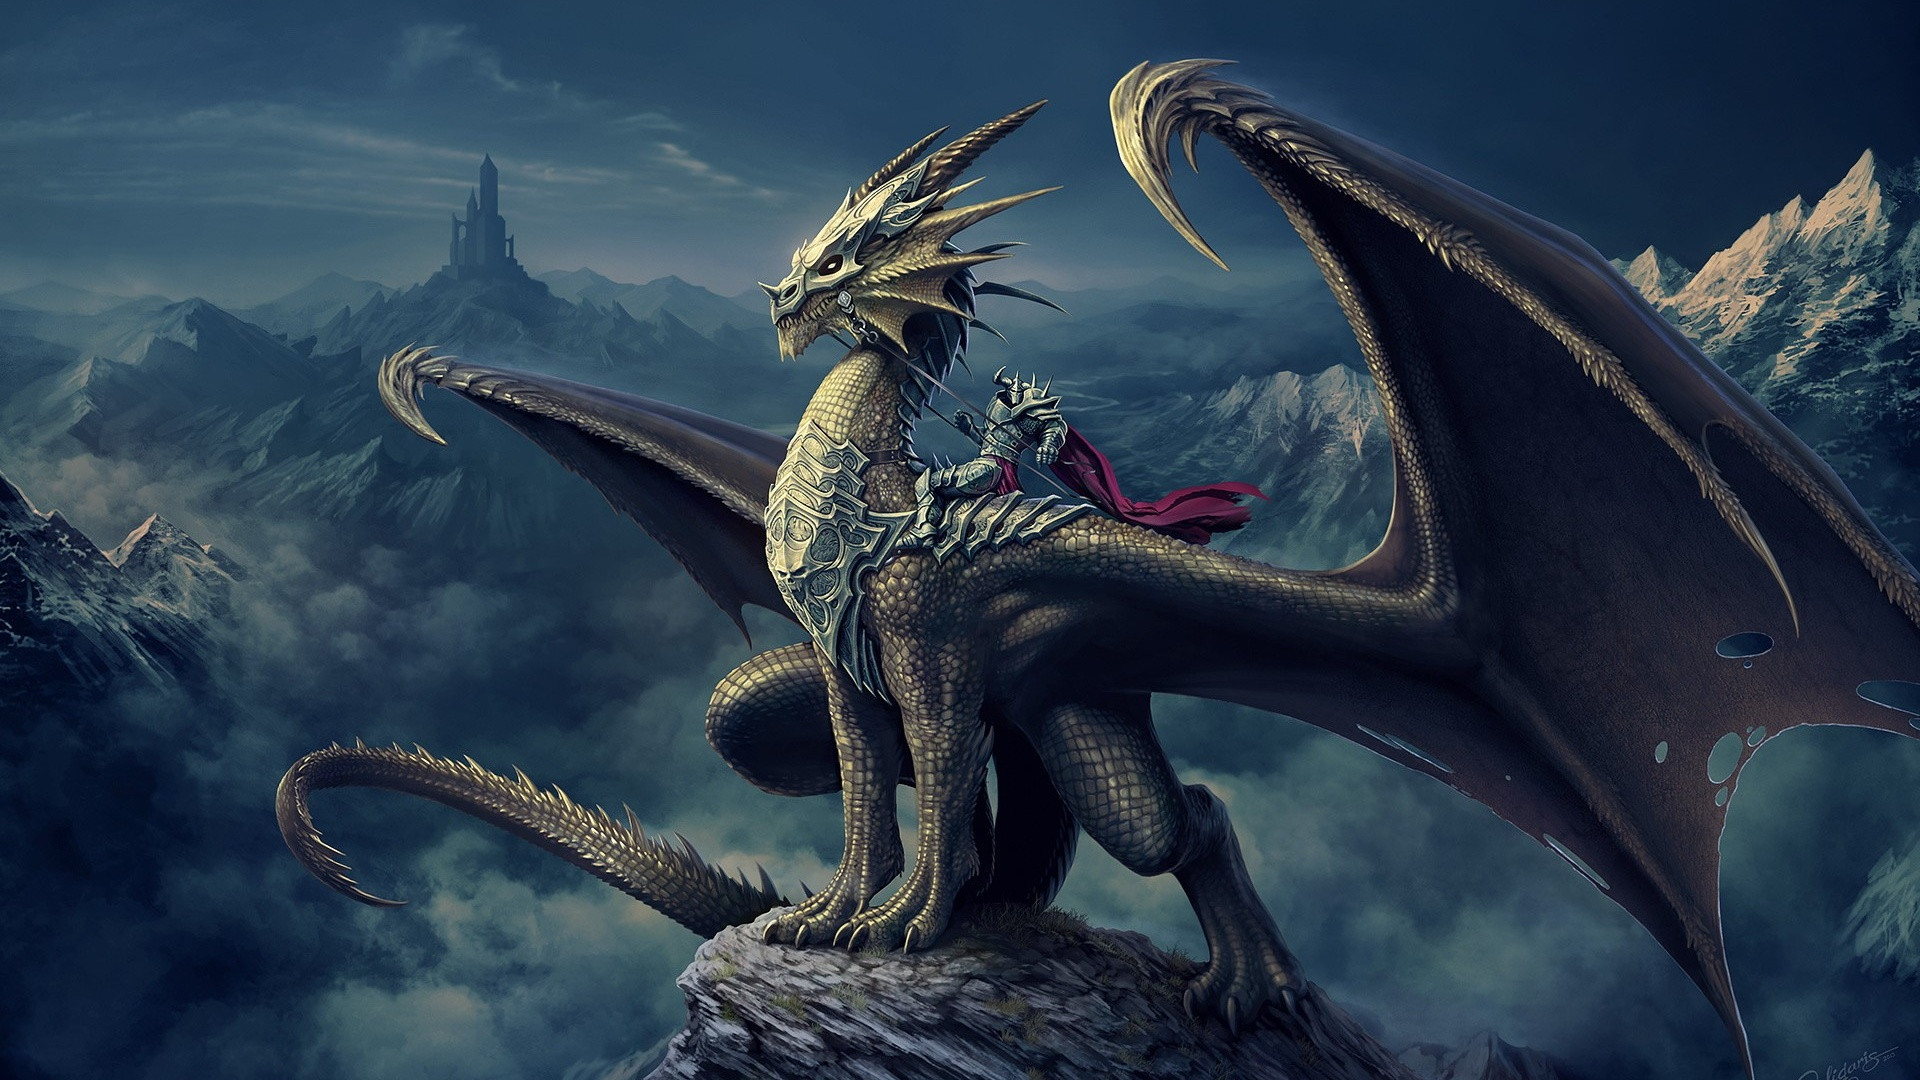 Cool Dragons Wallpaper 59 pictures